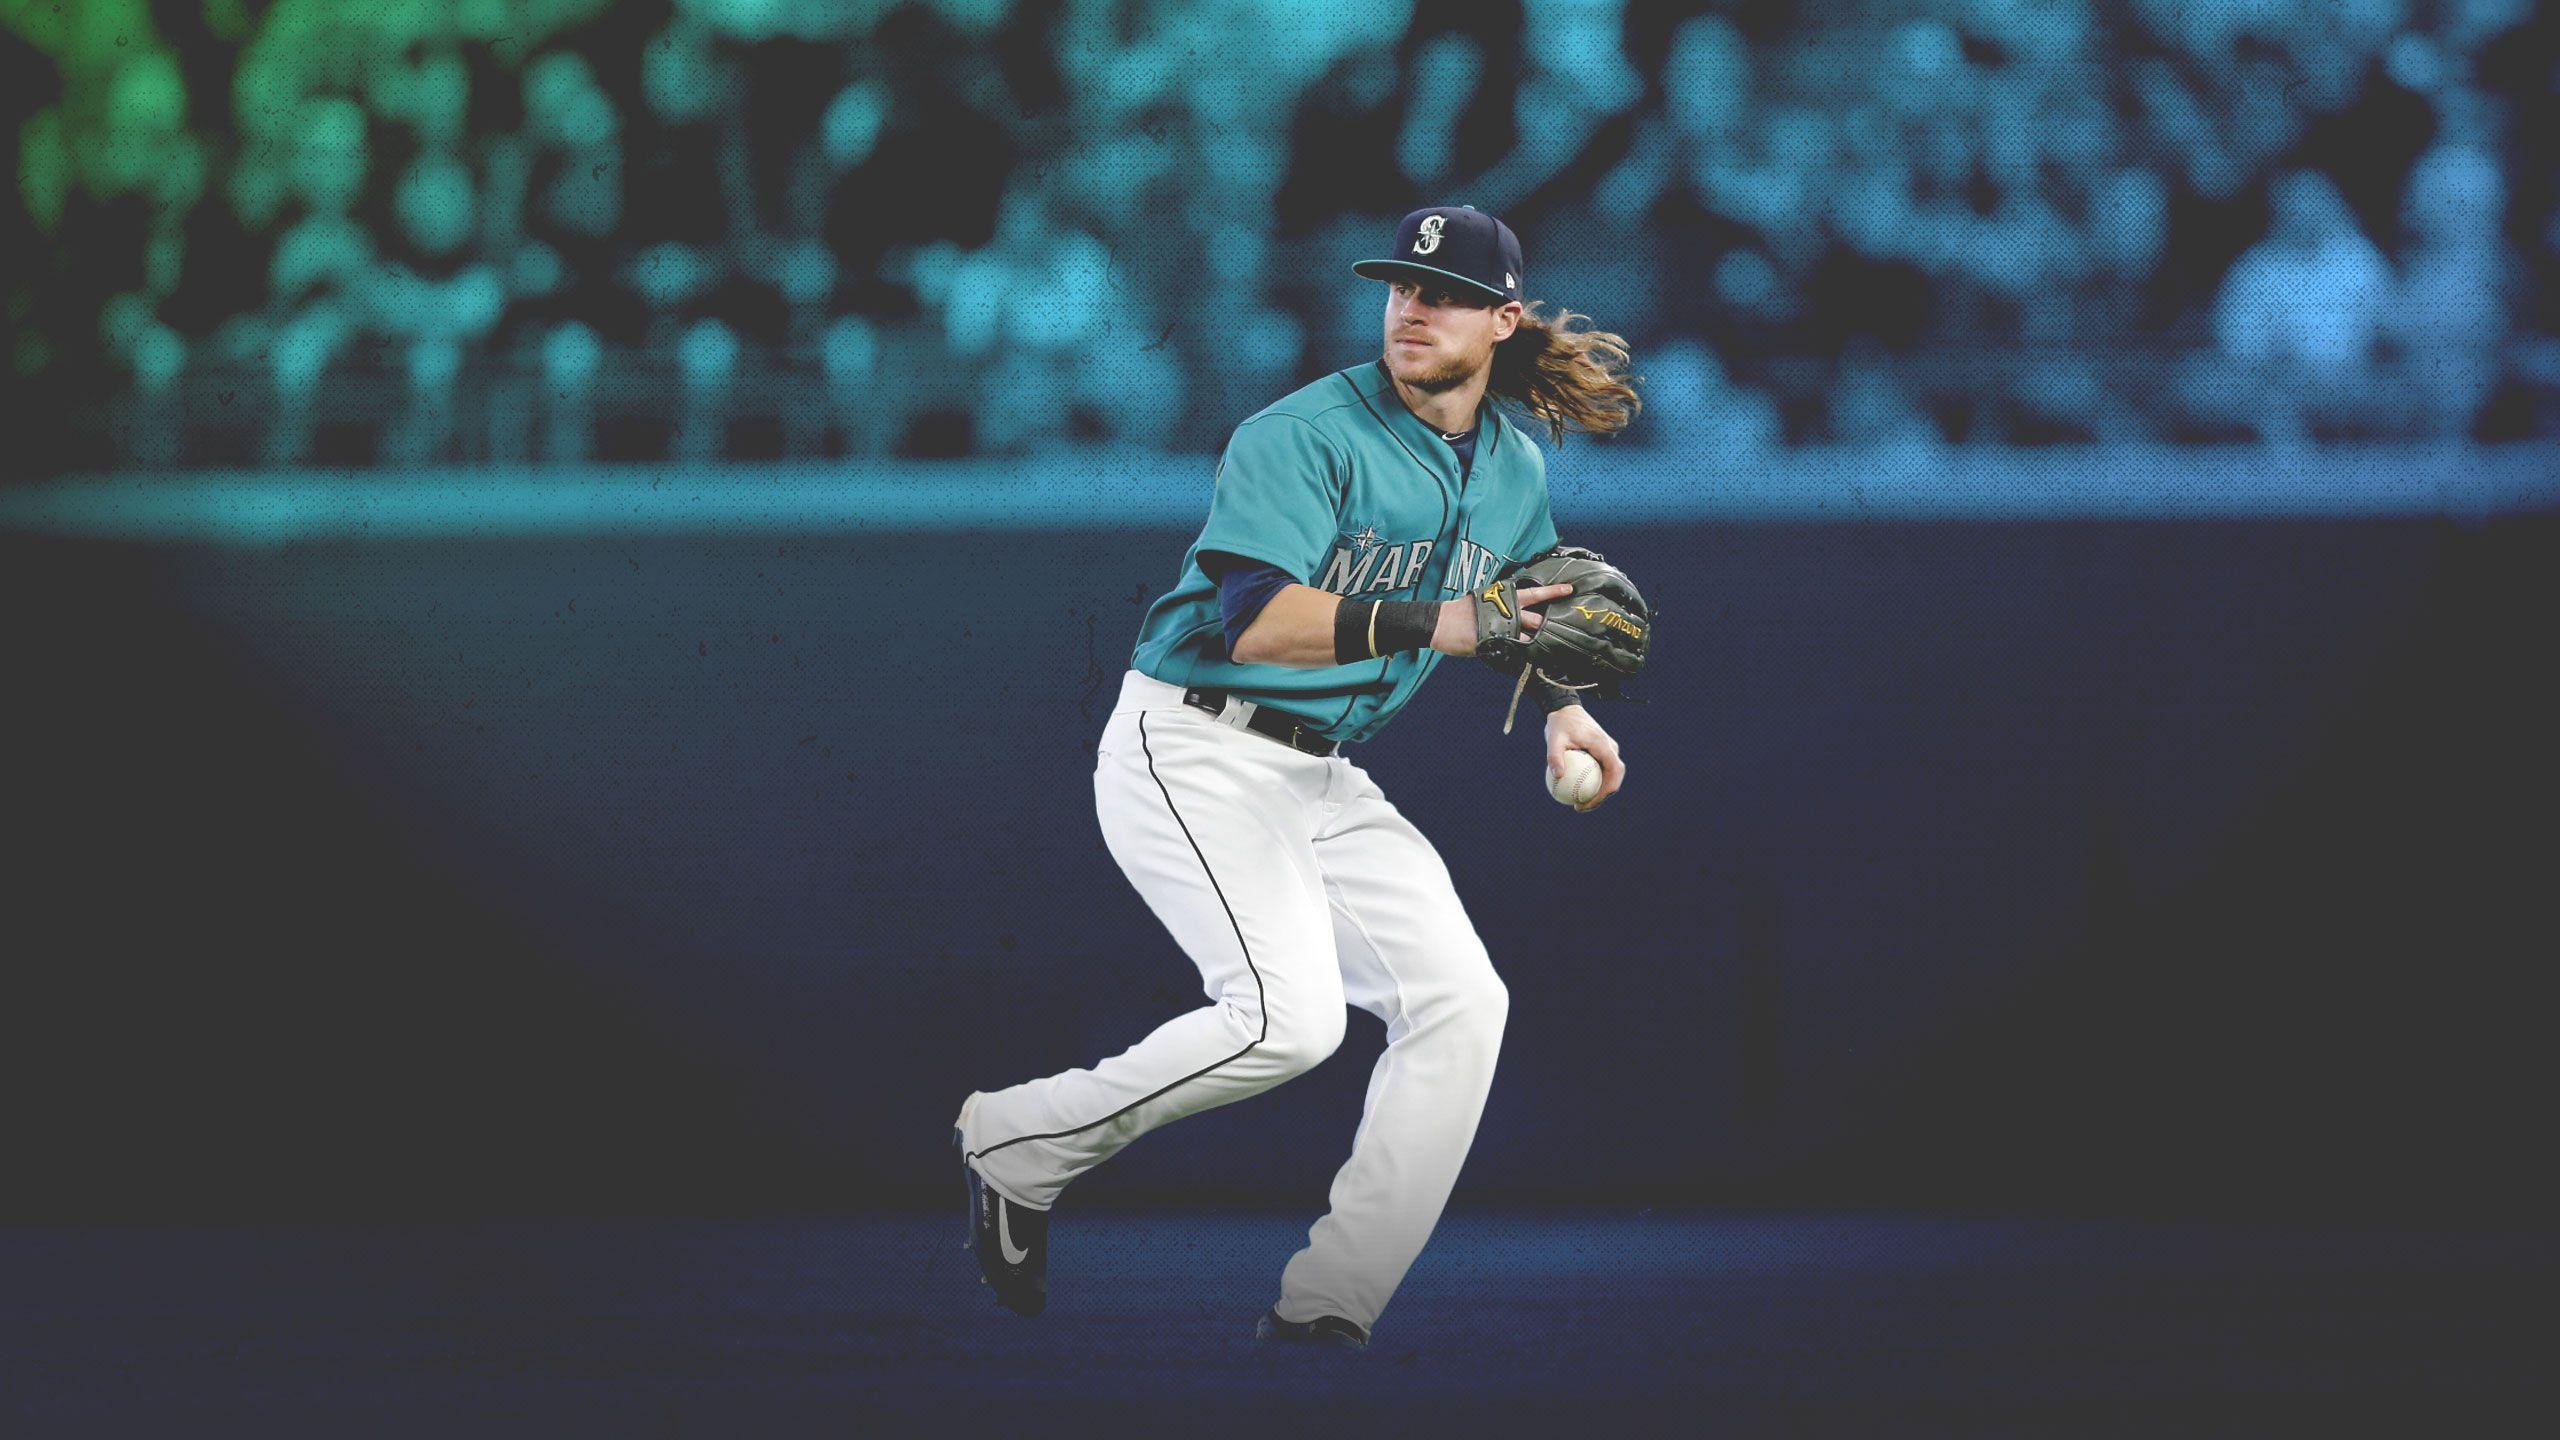 Mariners Players Wallpapers